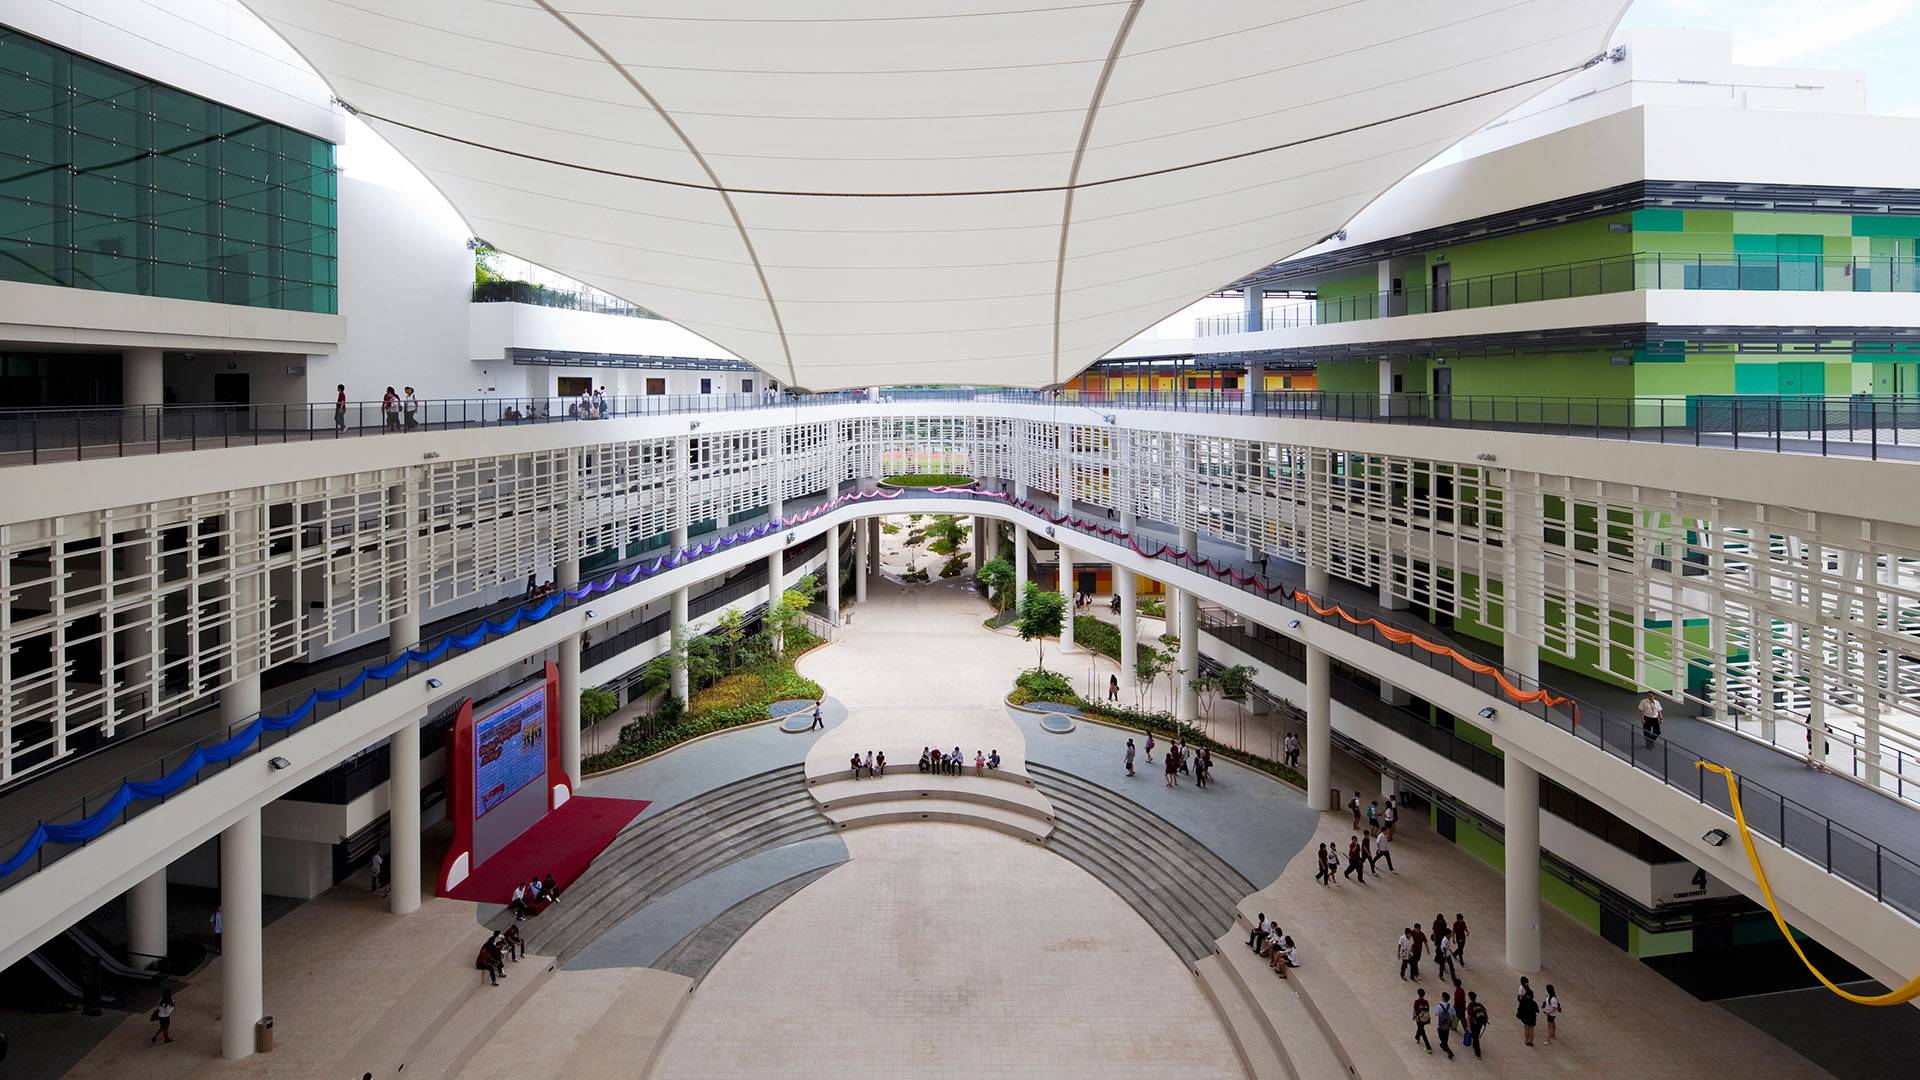 About ITE College West